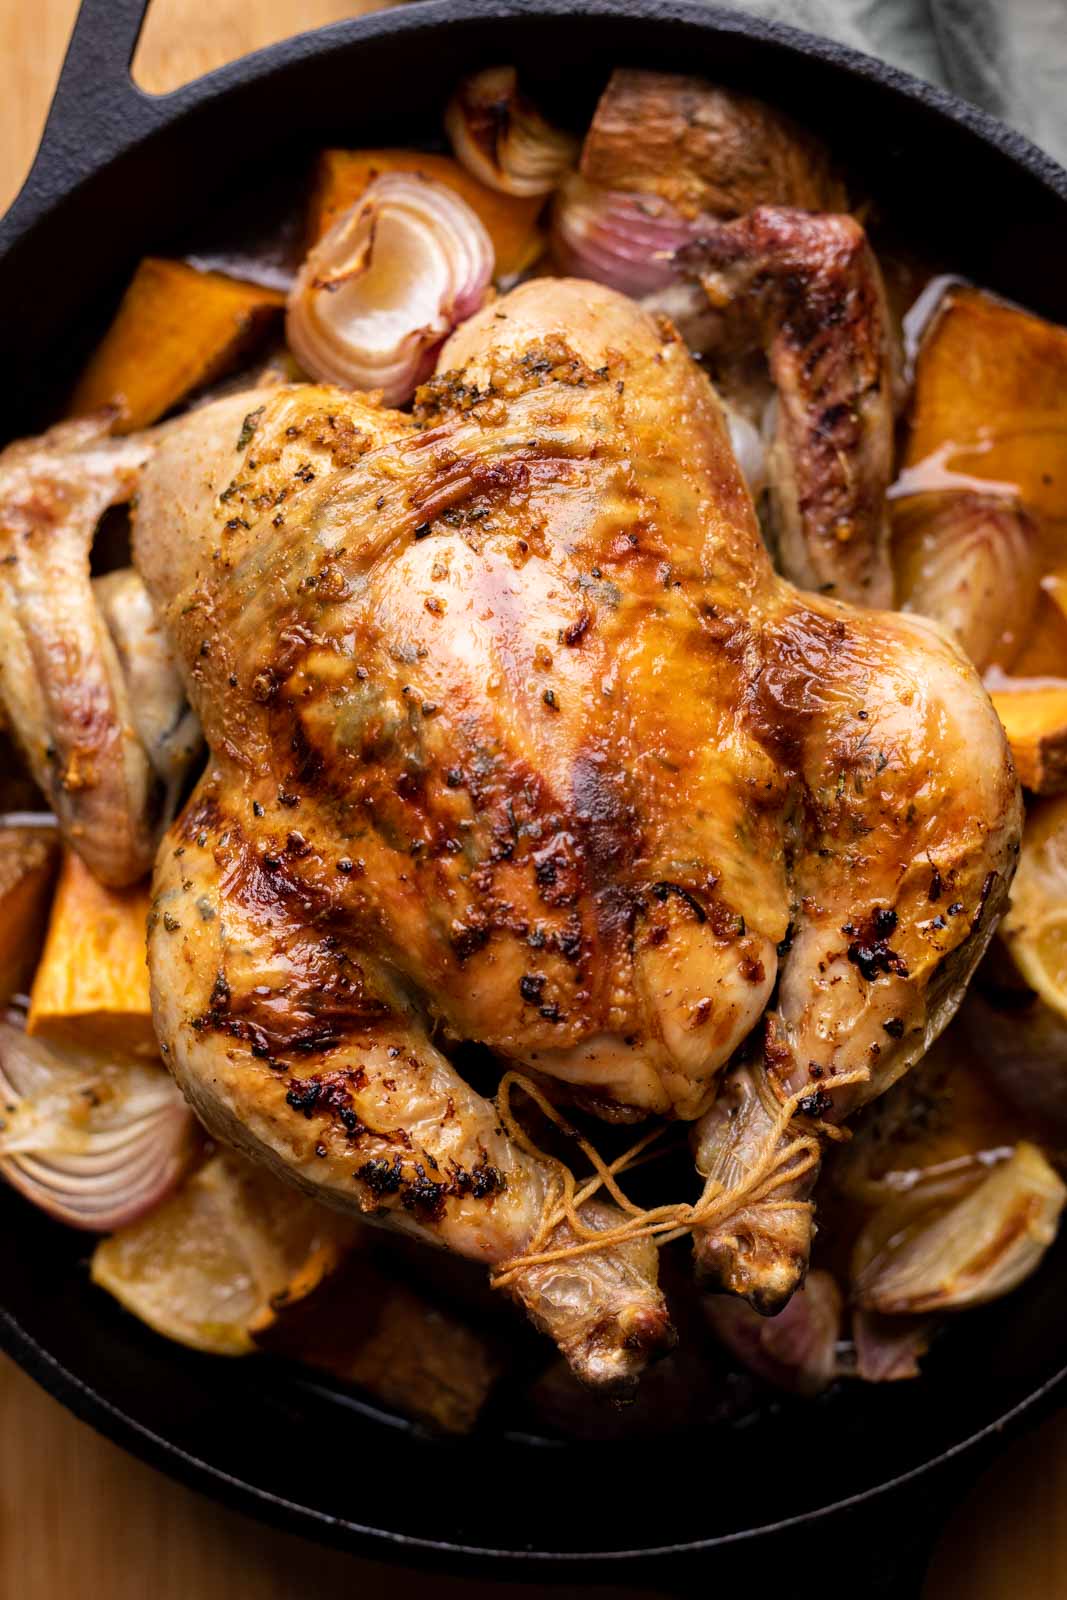 Roast chicken in the cast iron skillet, roasted with veggies and pan juices